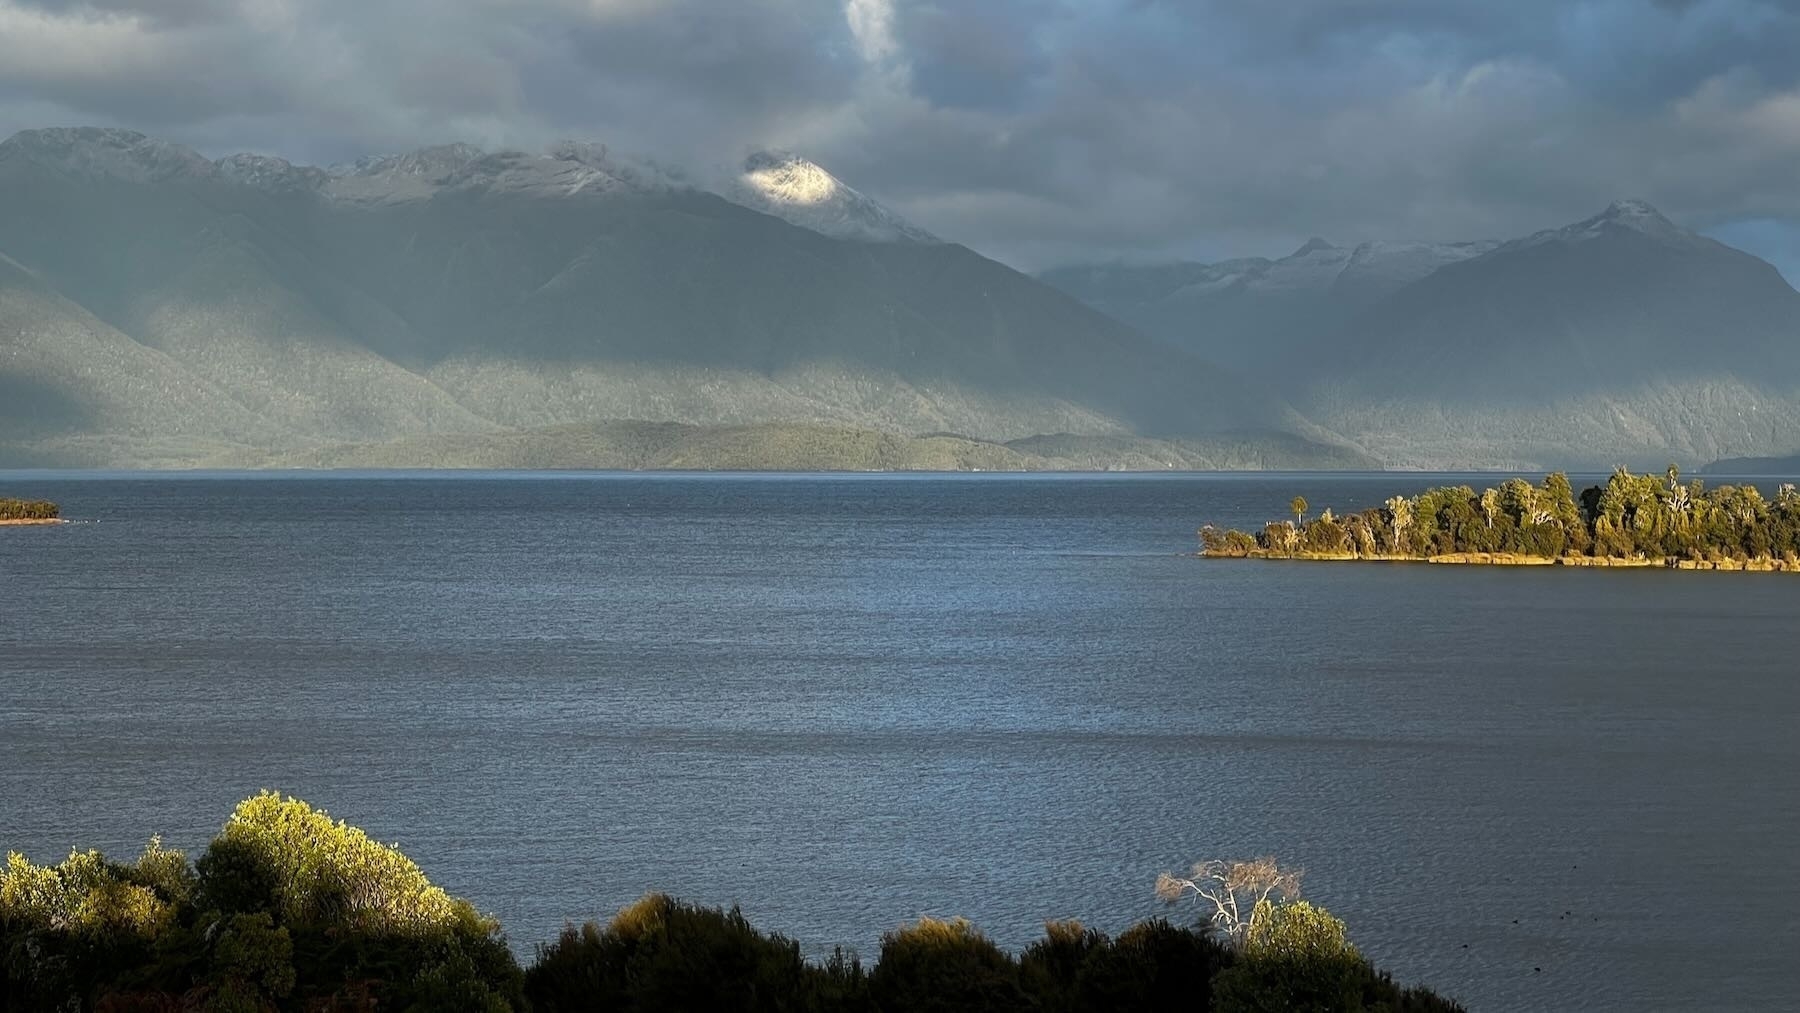 Te Anau Downs Scenic Lookout looks over the lake to mountains beyond, with a snowy peak. 